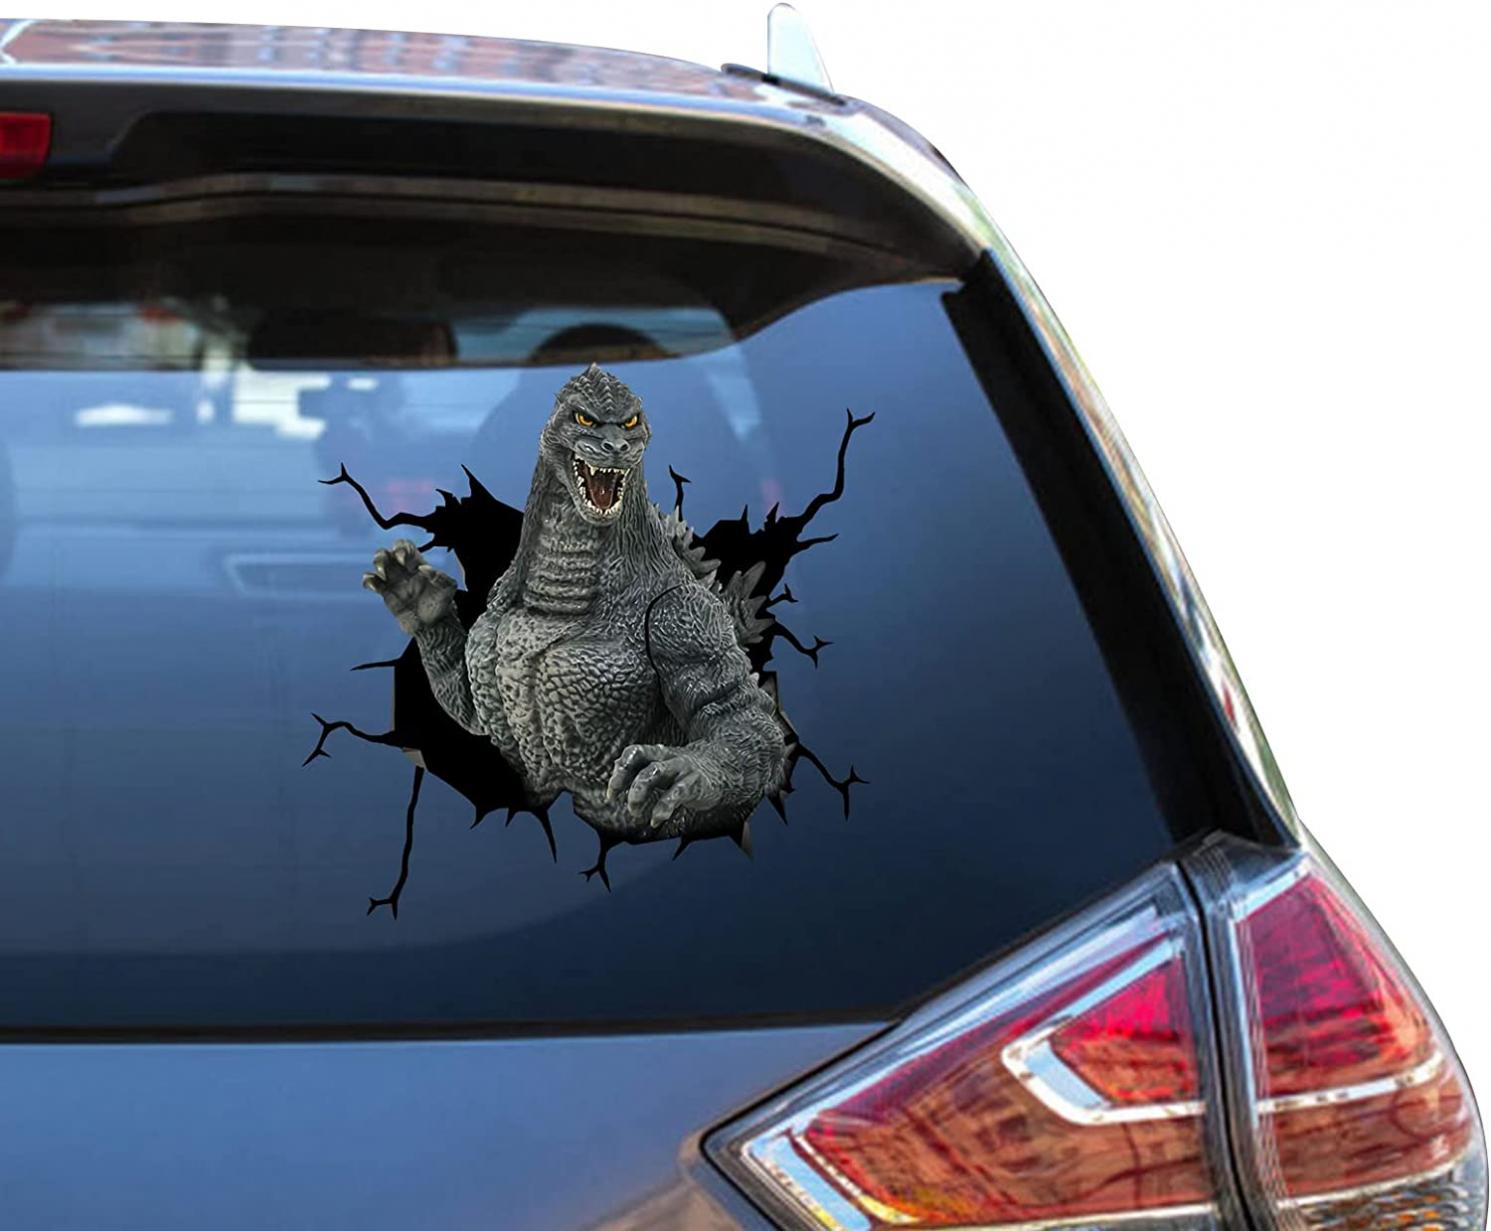 Camellia Print Godzilla Car Decals Godzilla Sticker Funny Face Magnetic Racing Sticers for Guys Clean Auto Decals